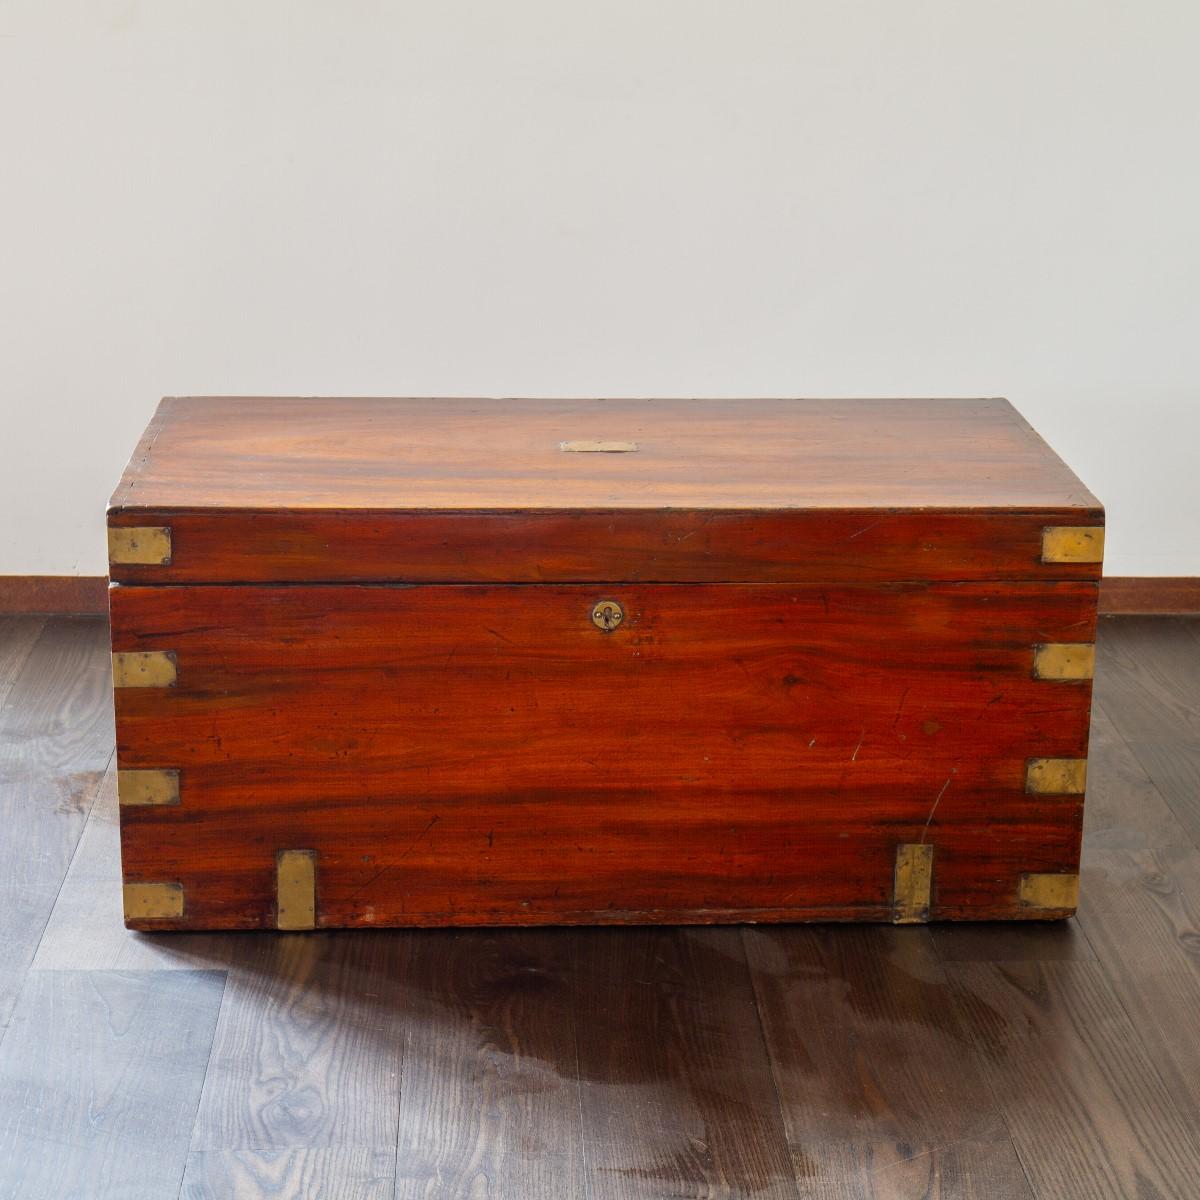 A 19th century brass bound camphor wood trunk with original brass lock, carrying handles and a brass plaque of ownership inscribed 'Fr G Smith’. Key included. Camphor wood was used in campaign furniture especially due to its durable density and